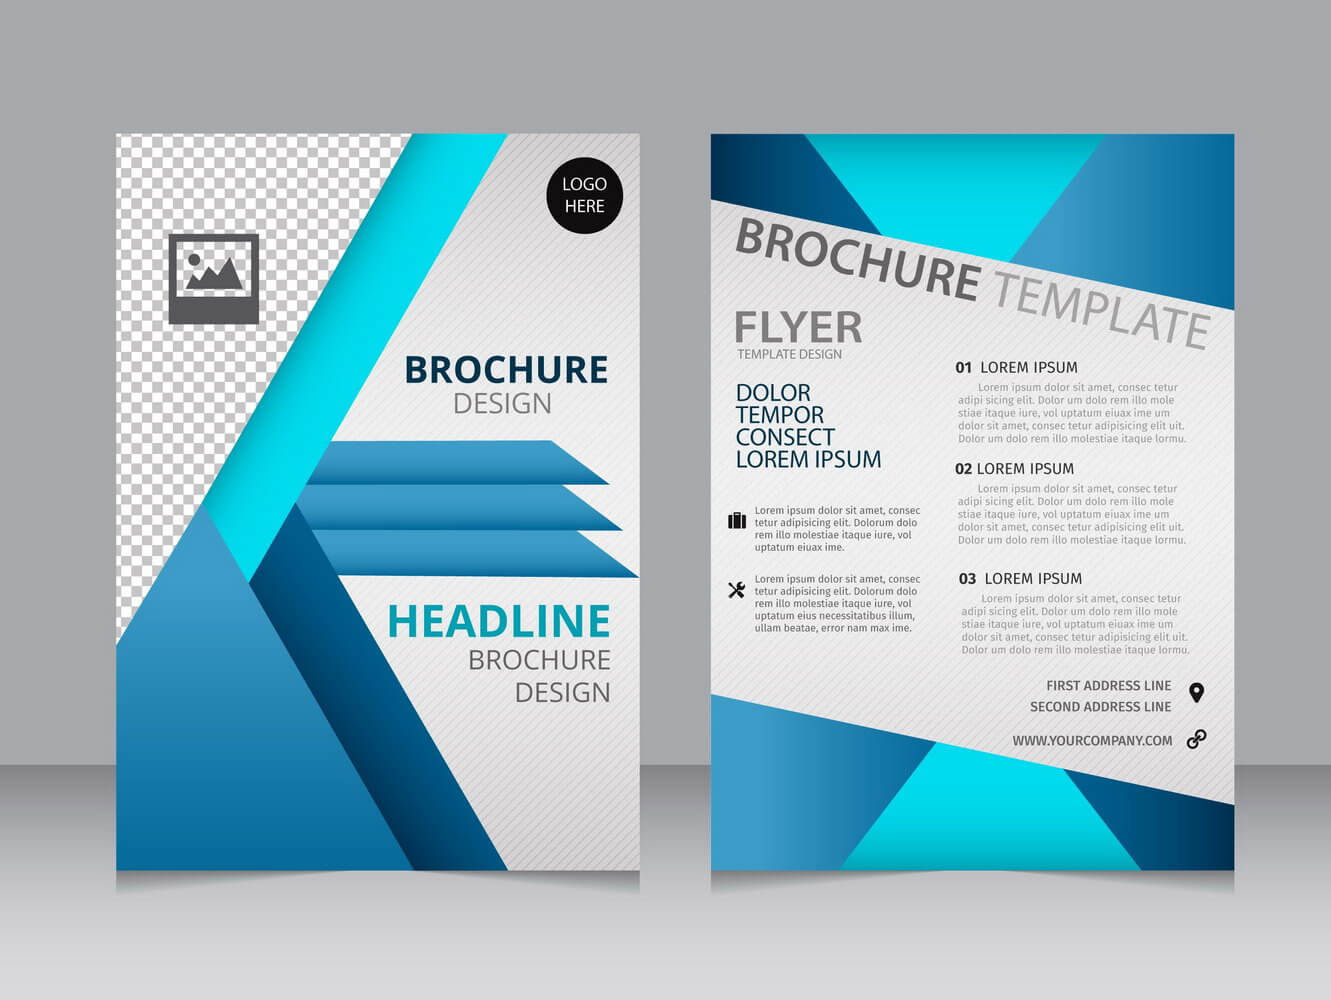 012 Blank Brochure Templates Free Download Word Template Inside Illustrator Brochure Templates Free Download